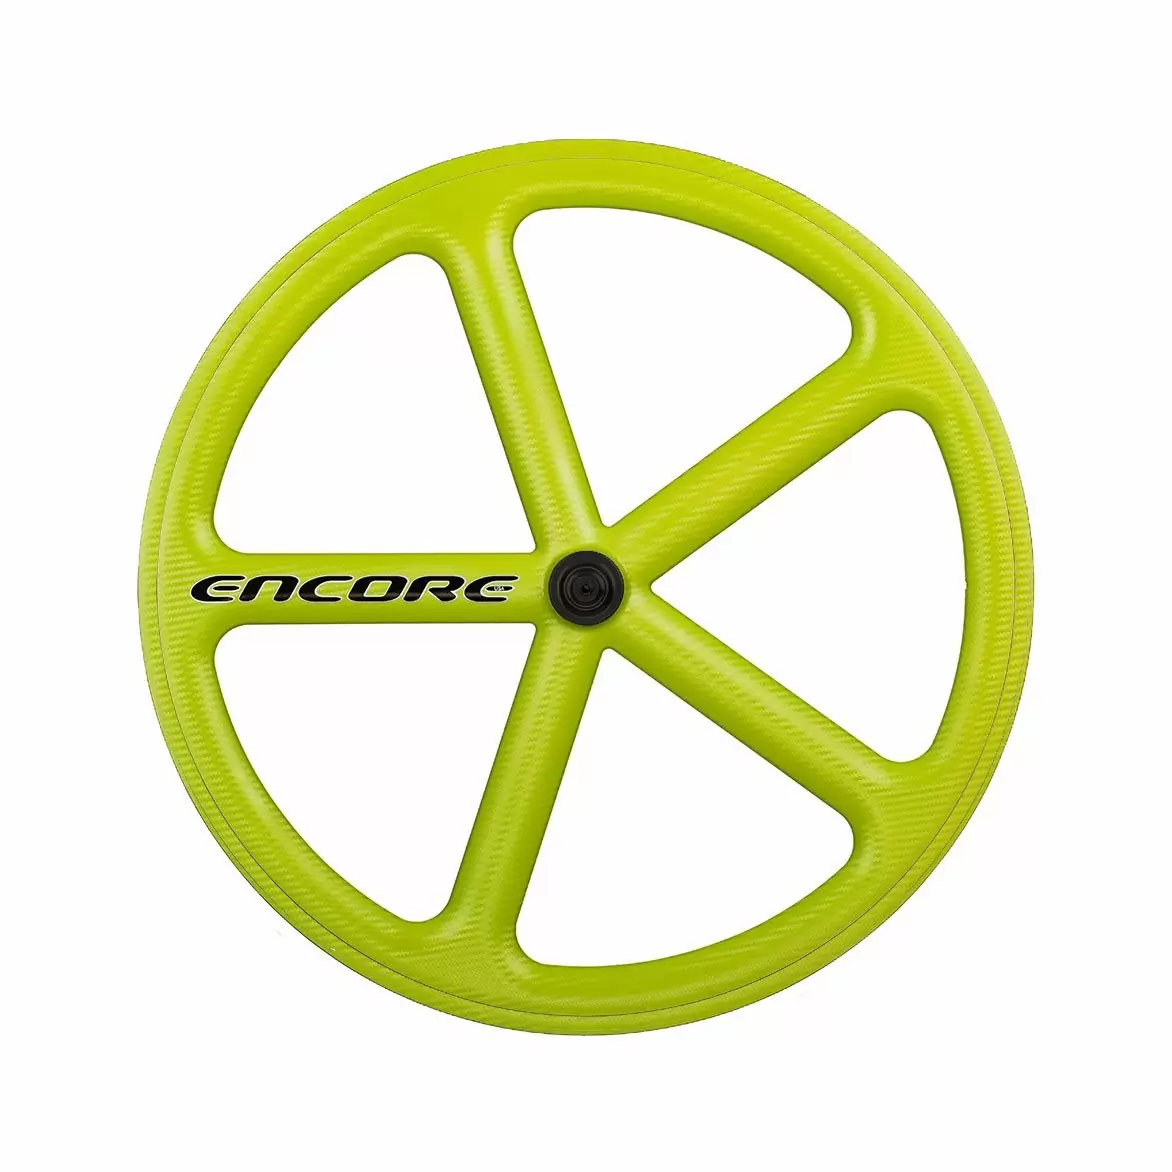 roue arrière 700c track 5 rayons carbone tissage chaux nmsw - image